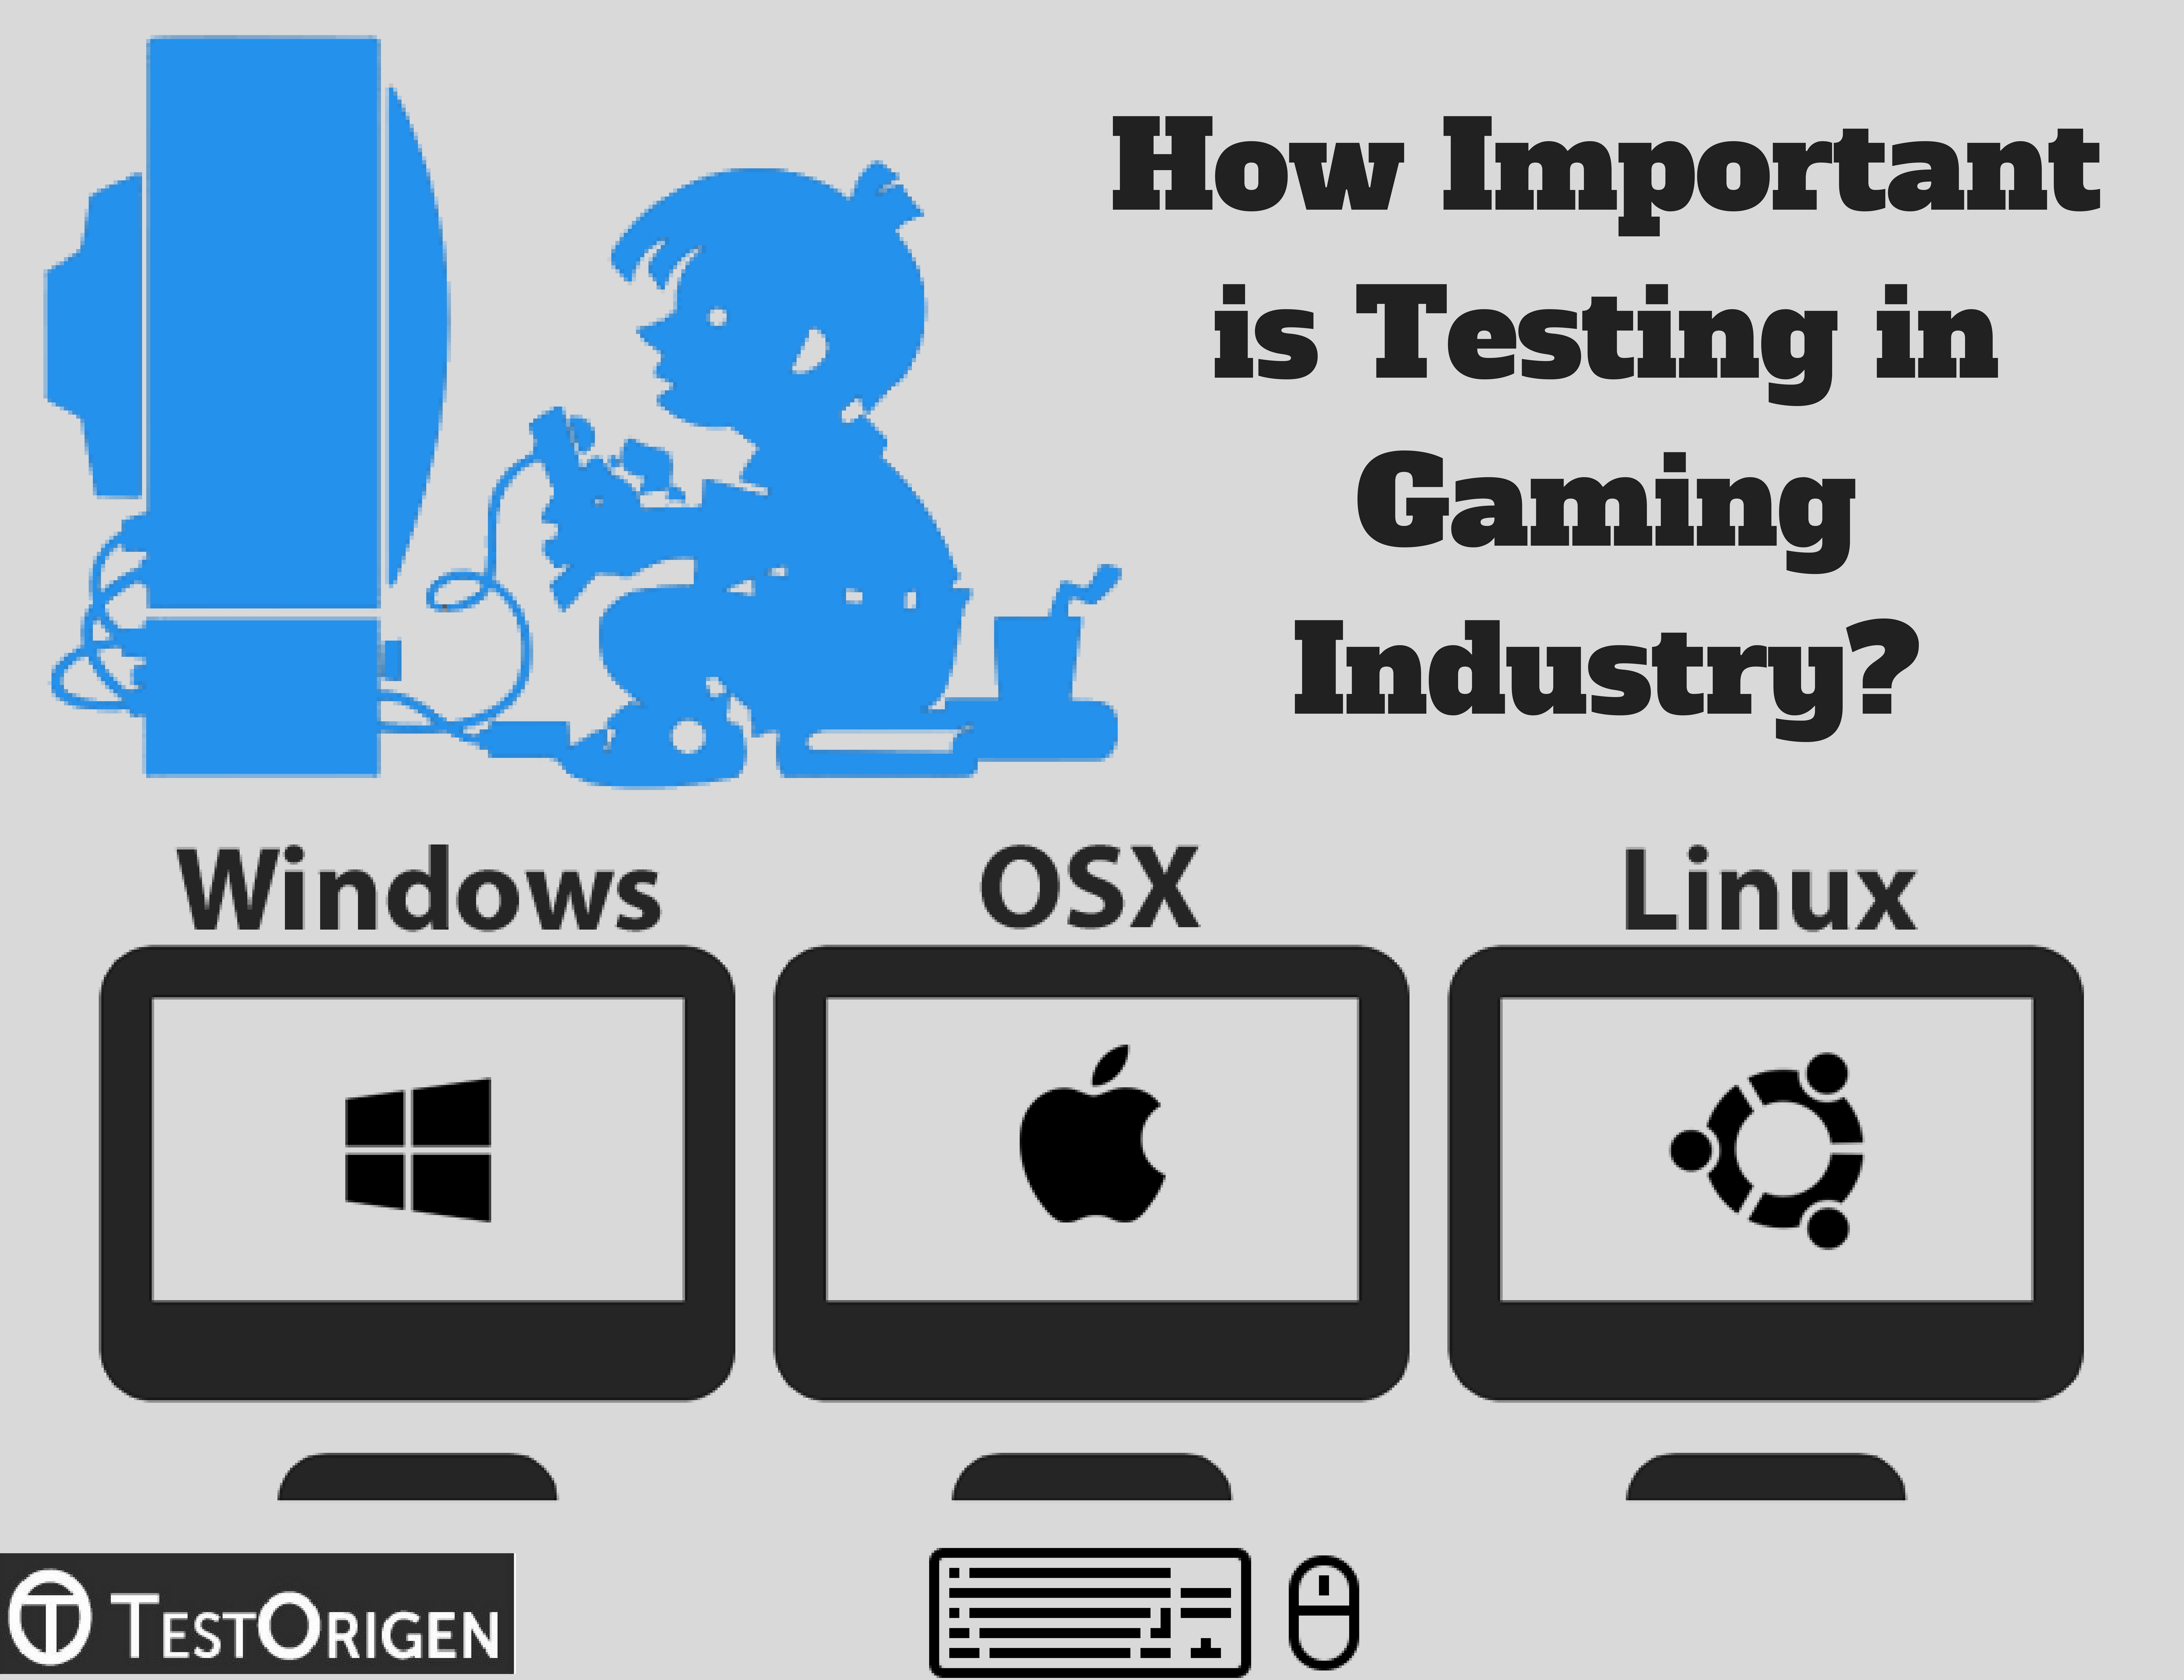 How Important is Testing in Gaming Industry?